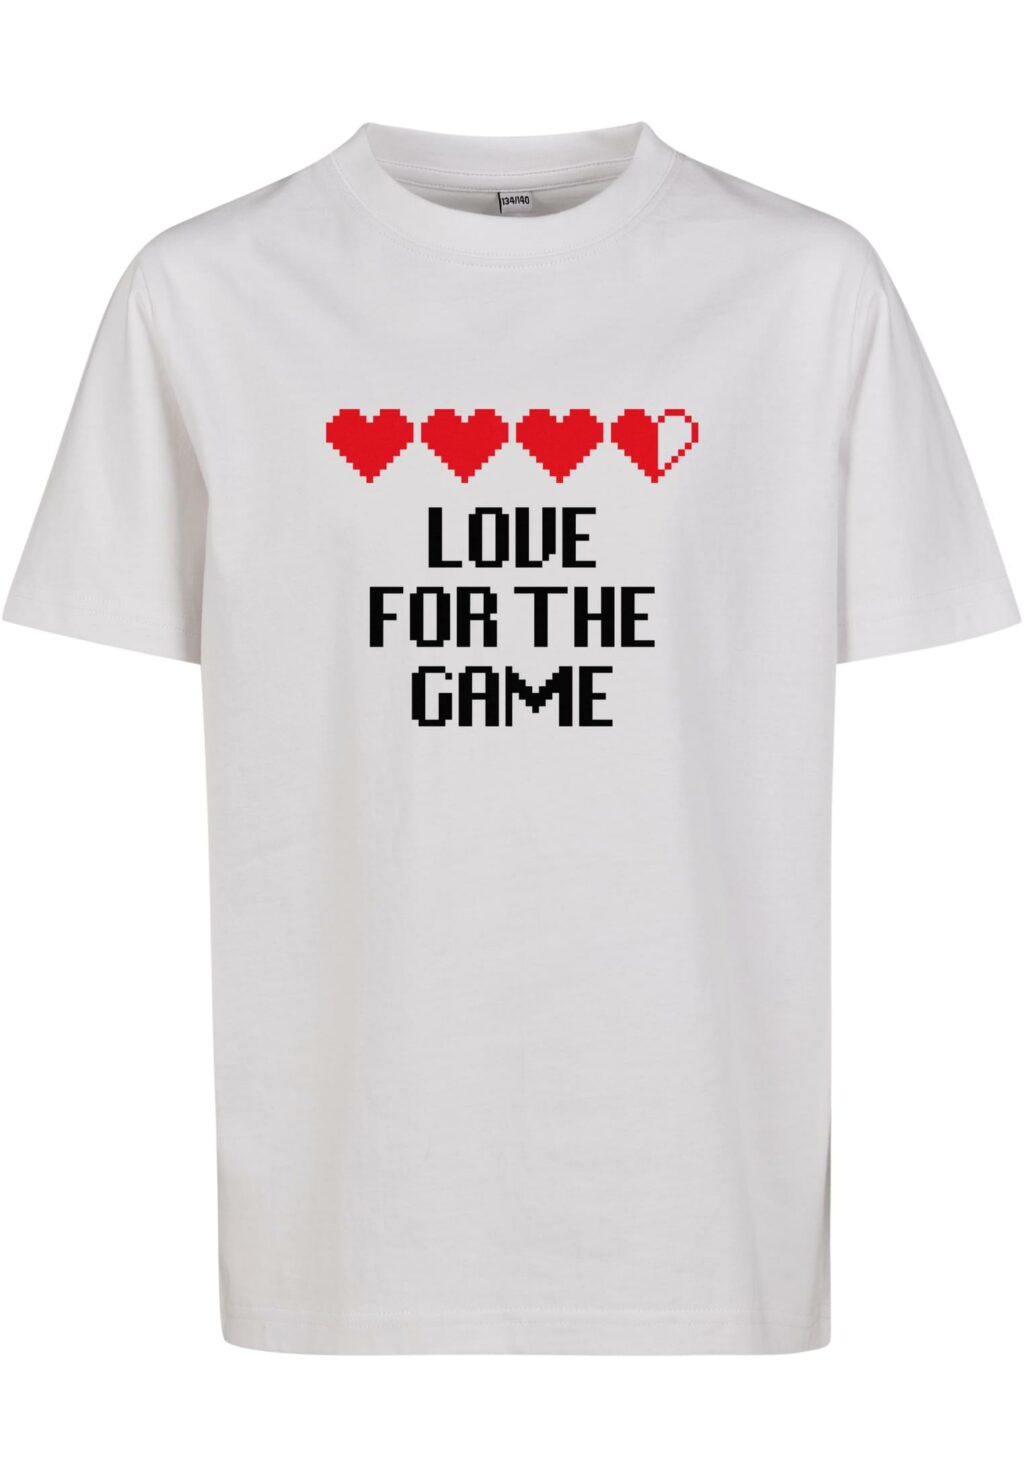 Kids Love for The Game Tee white MTK174